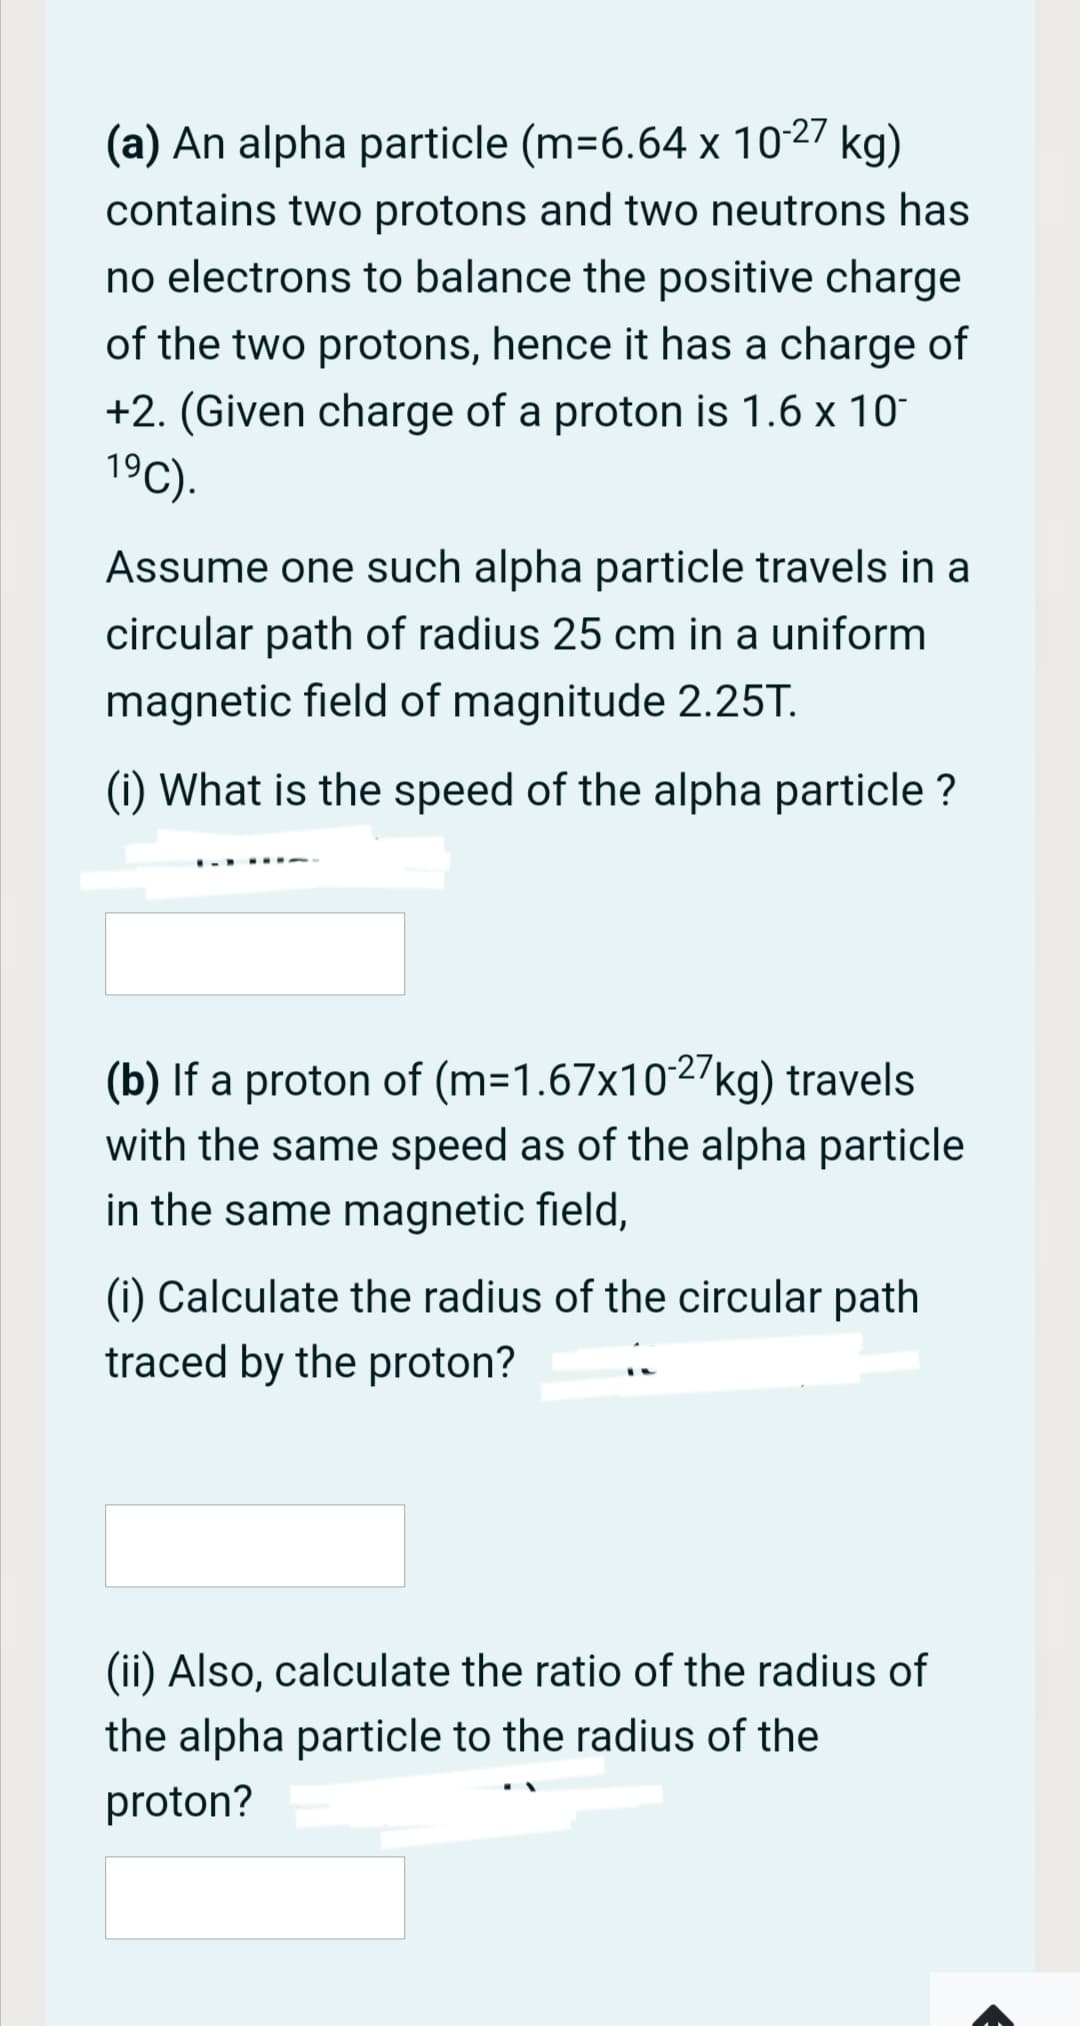 (a) An alpha particle (m=6.64 x 1027 kg)
contains two protons and two neutrons has
no electrons to balance the positive charge
of the two protons, hence it has a charge of
+2. (Given charge of a proton is 1.6 x 10°
19C).
Assume one such alpha particle travels in a
circular path of radius 25 cm in a uniform
magnetic field of magnitude 2.25T.
(i) What is the speed of the alpha particle ?
(b) If a proton of (m=1.67x1027kg) travels
with the same speed as of the alpha particle
in the same magnetic field,
(i) Calculate the radius of the circular path
traced by the proton?
(ii) Also, calculate the ratio of the radius of
the alpha particle to the radius of the
proton?
